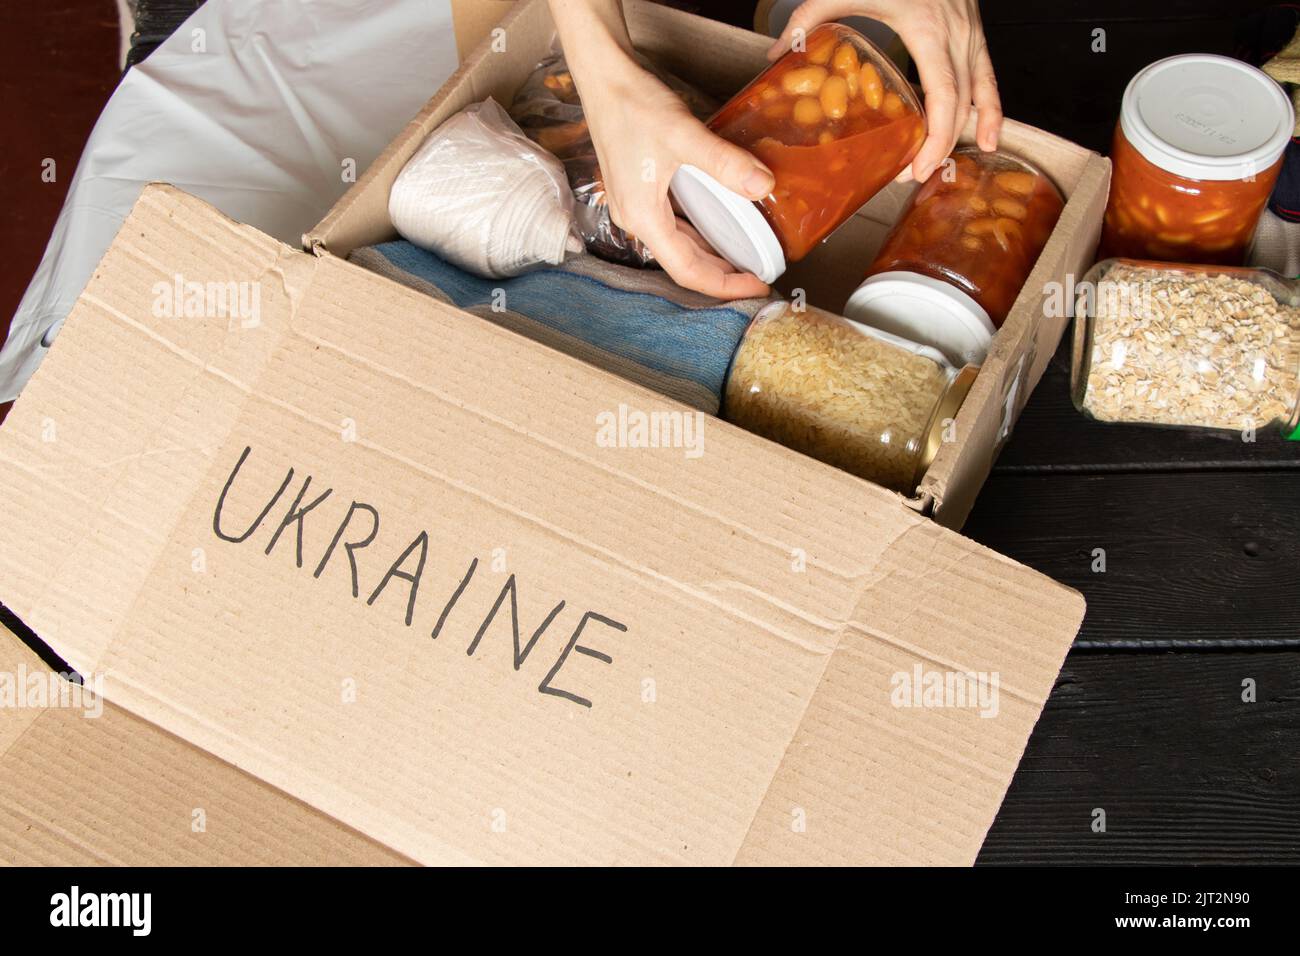 Collecting a humanitarian food set to help people who suffered during the war at the hands of Russia, stop the war in Ukraine, humanitarian aid 2022 Stock Photo